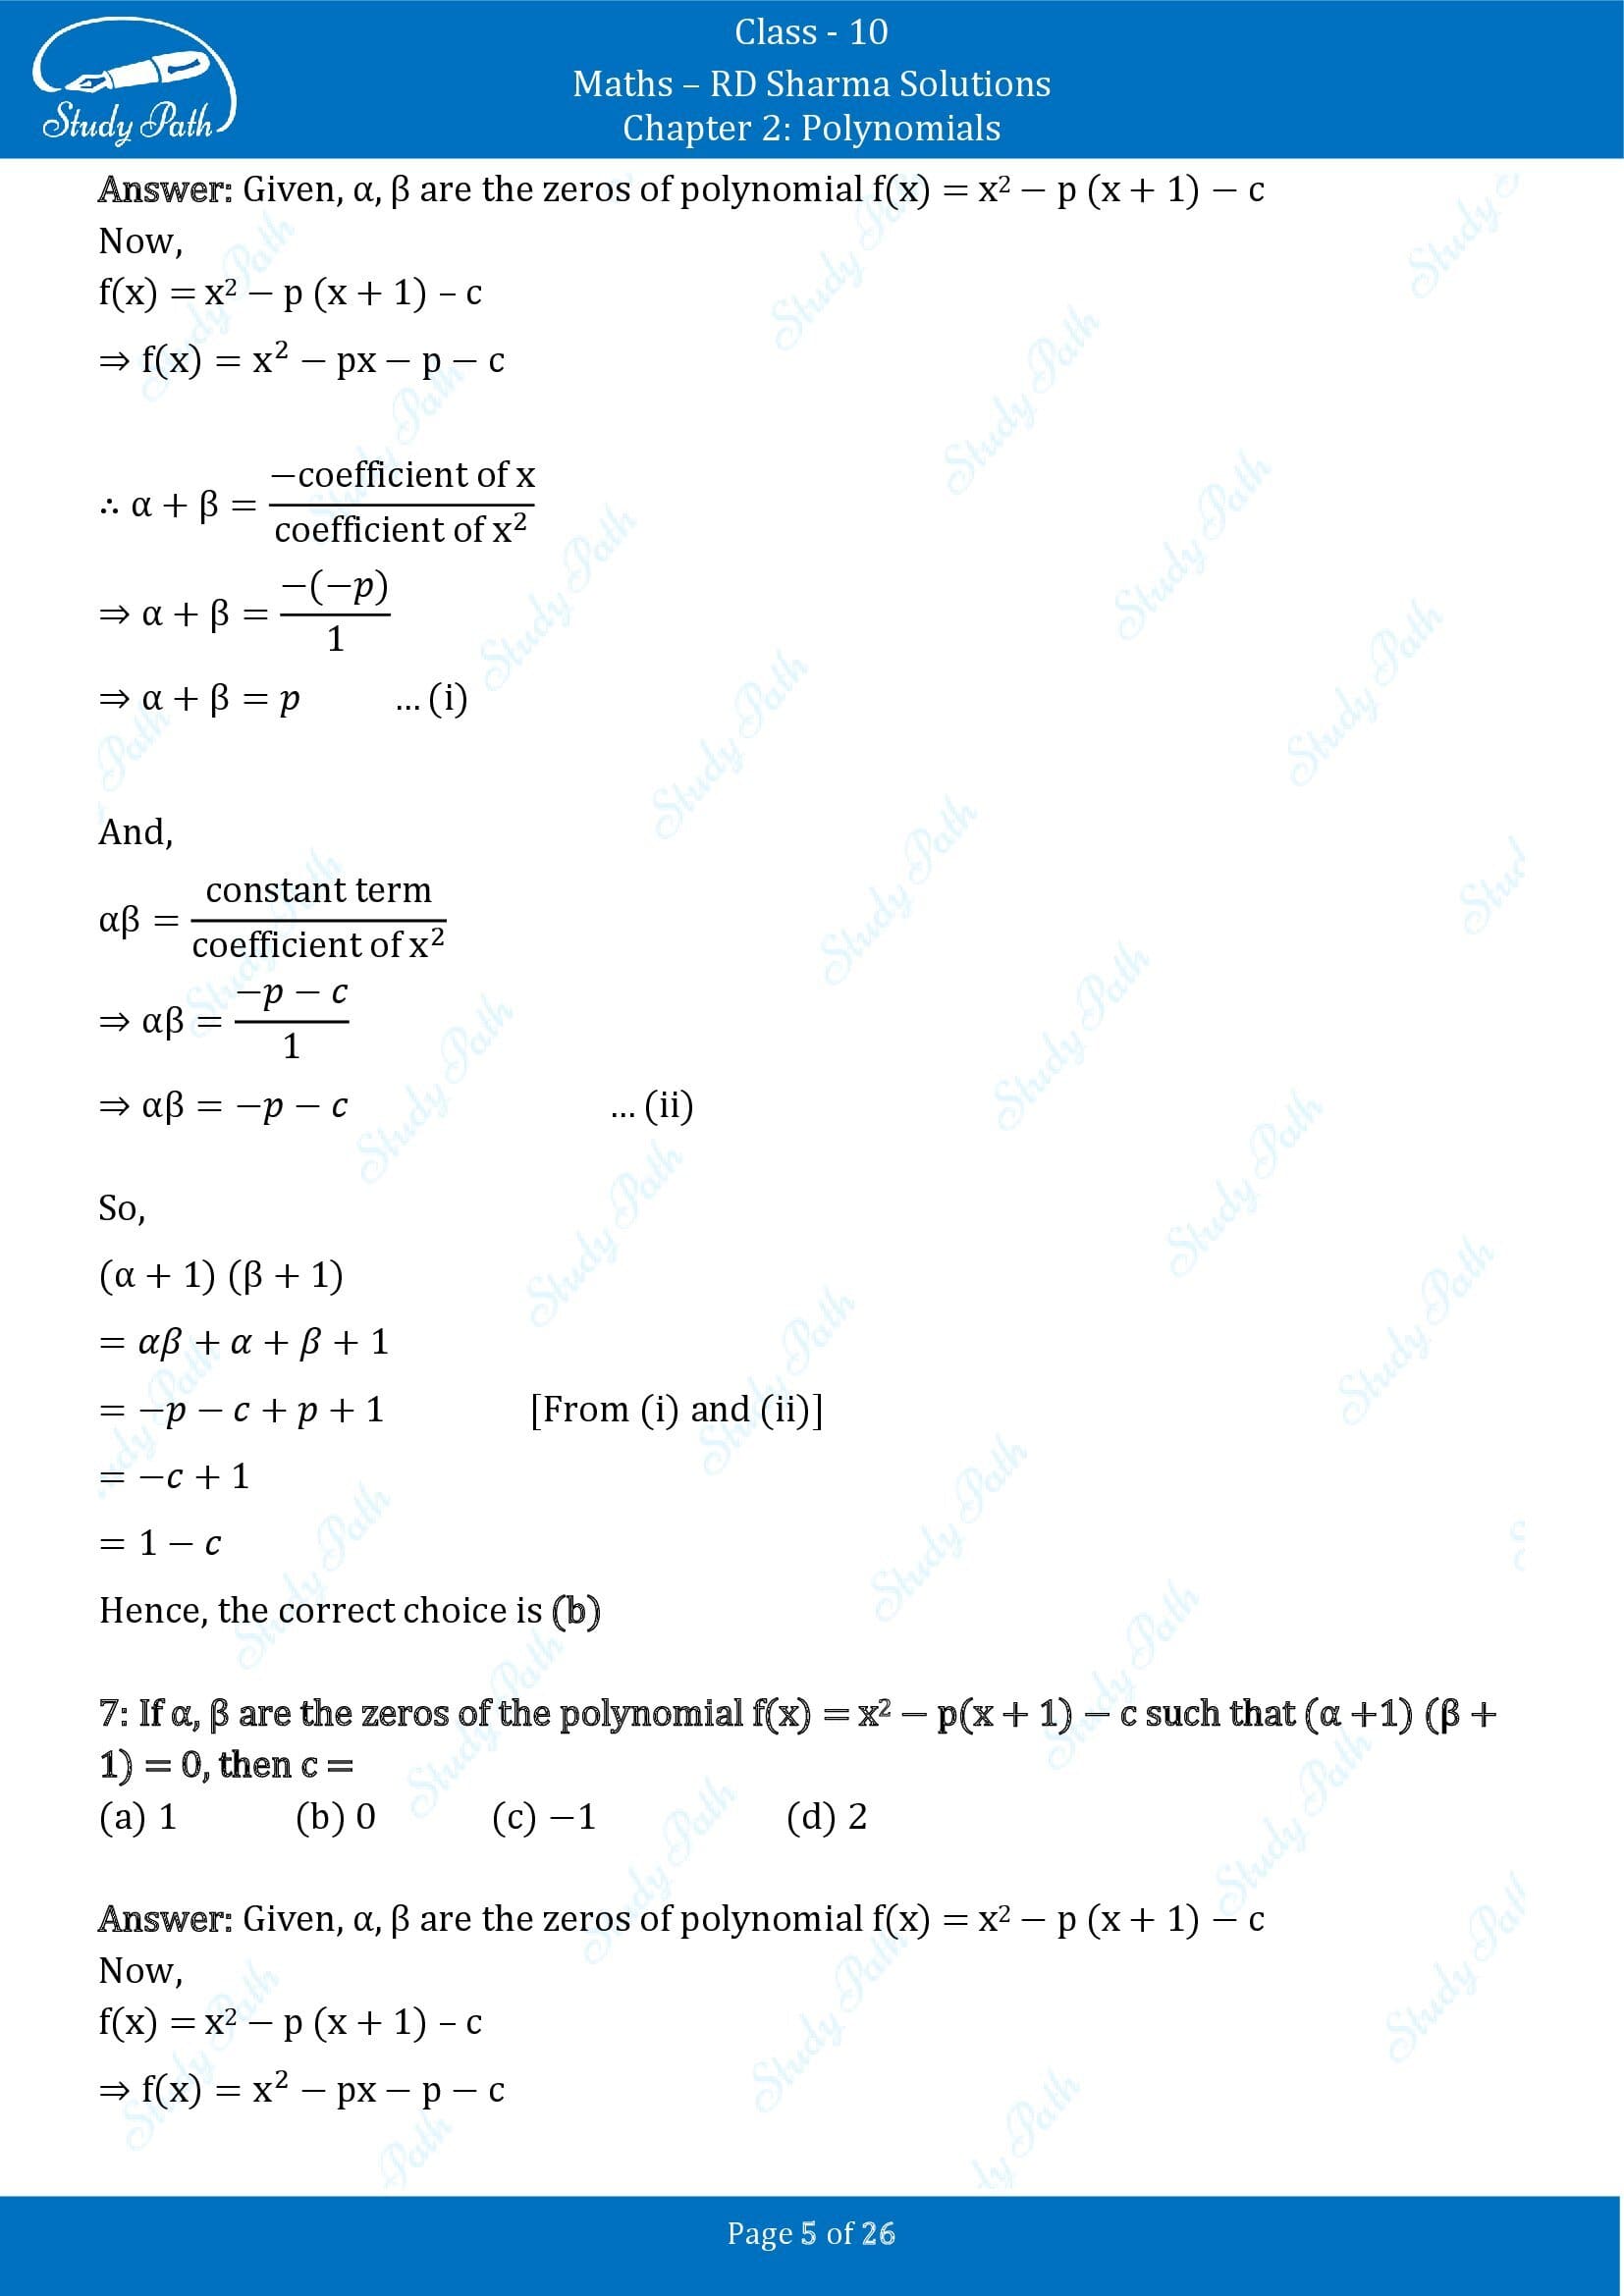 RD Sharma Solutions Class 10 Chapter 2 Polynomials Multiple Choice Questions MCQs 00005